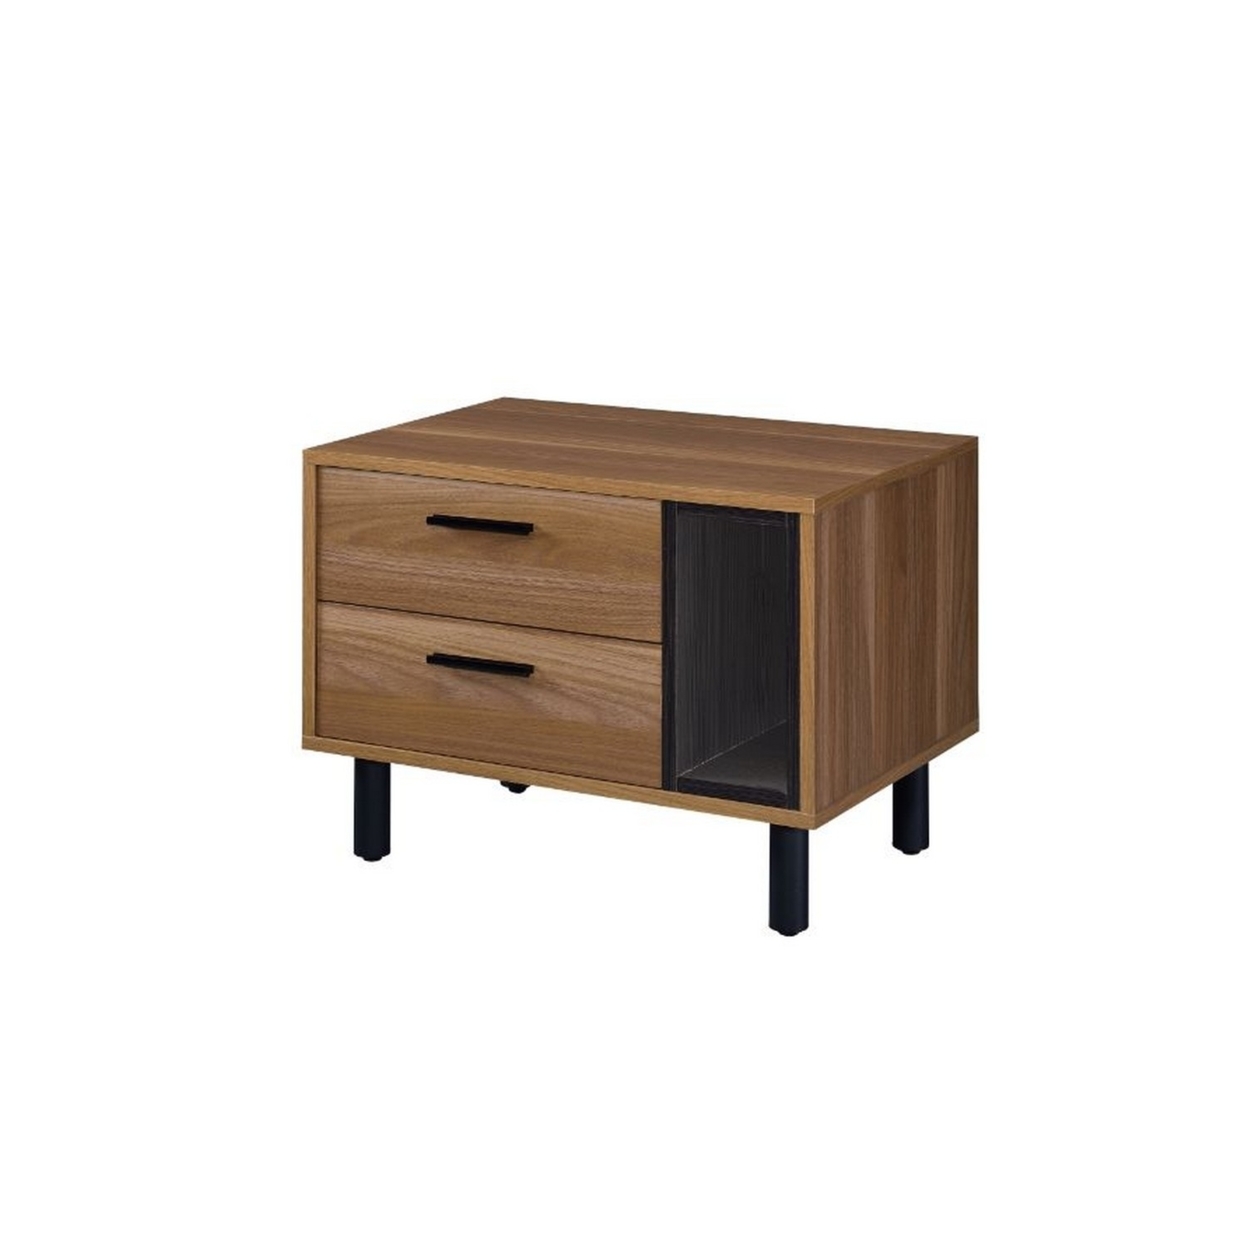 Accent Table With A Stlish Pull Out Tray, Brown And Black- Saltoro Sherpi